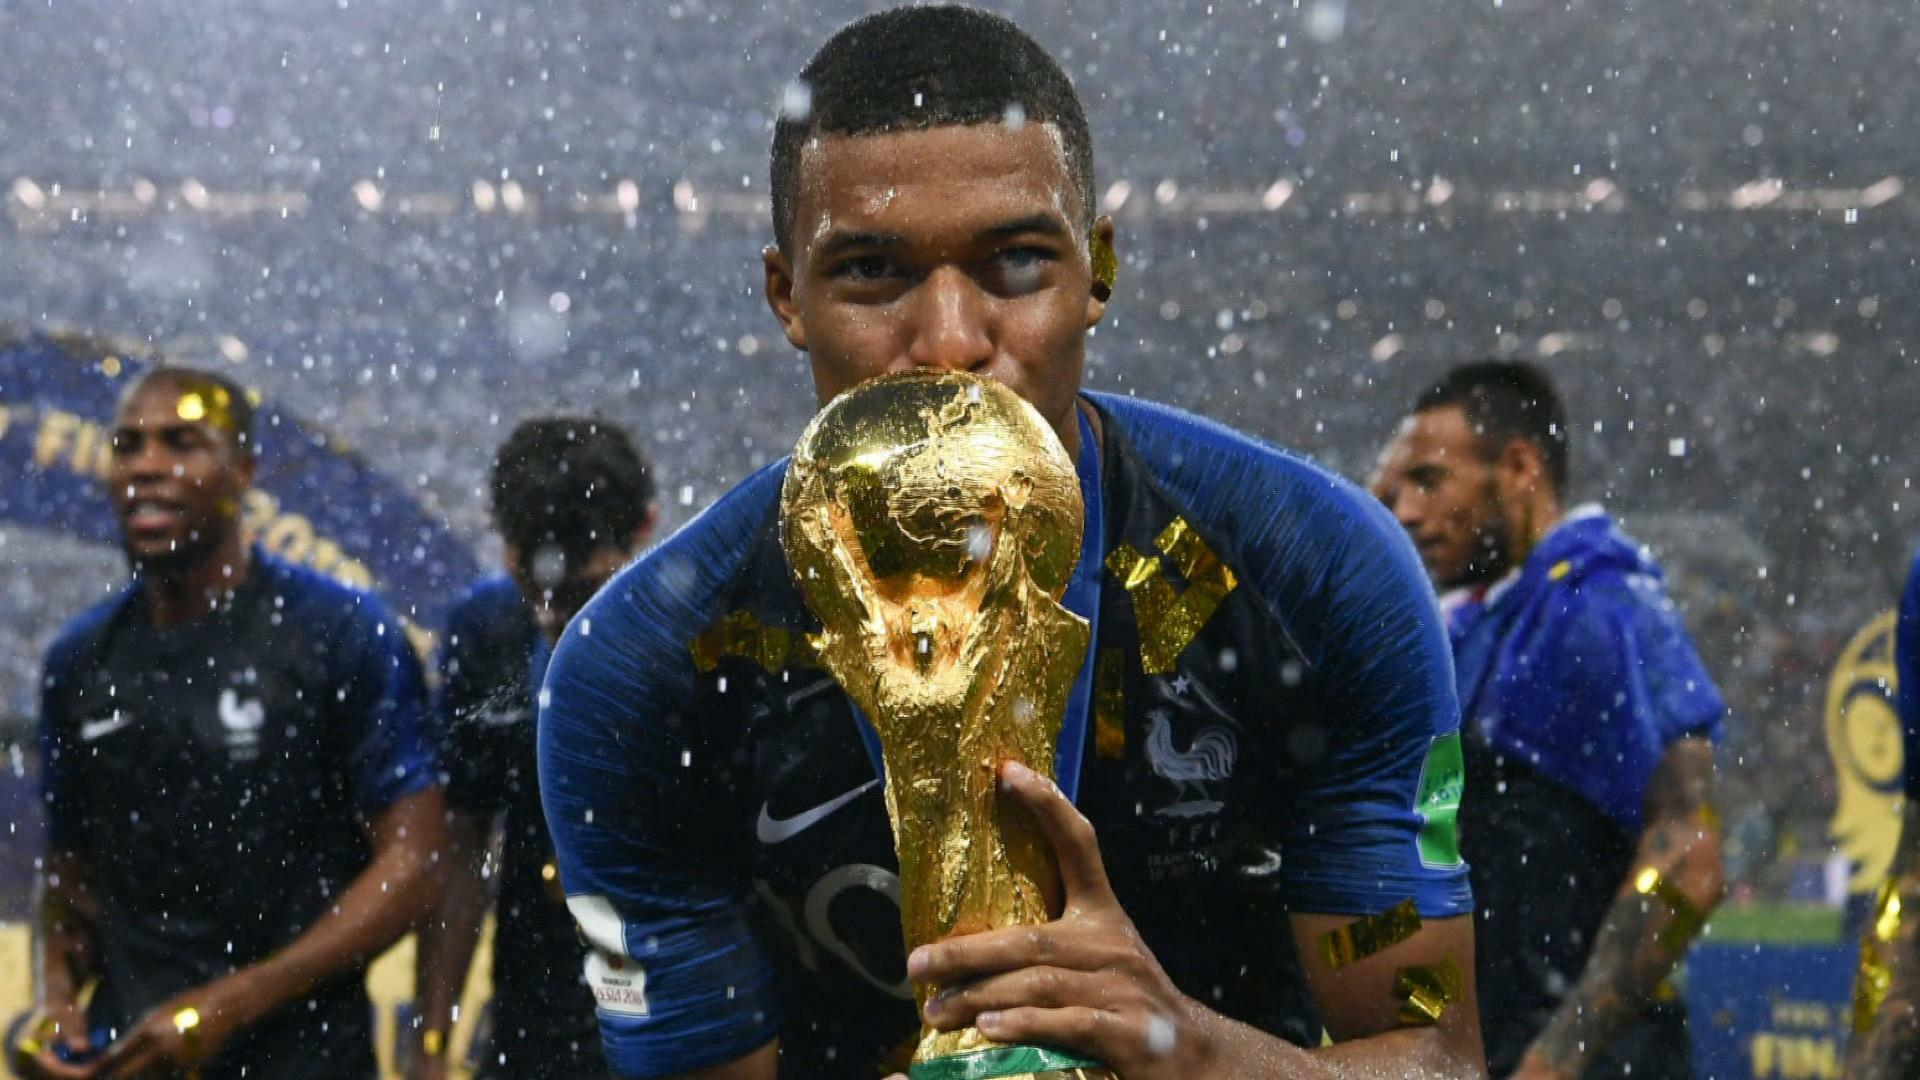 Watch CBS Saturday Morning: The story of the World Cup trophy